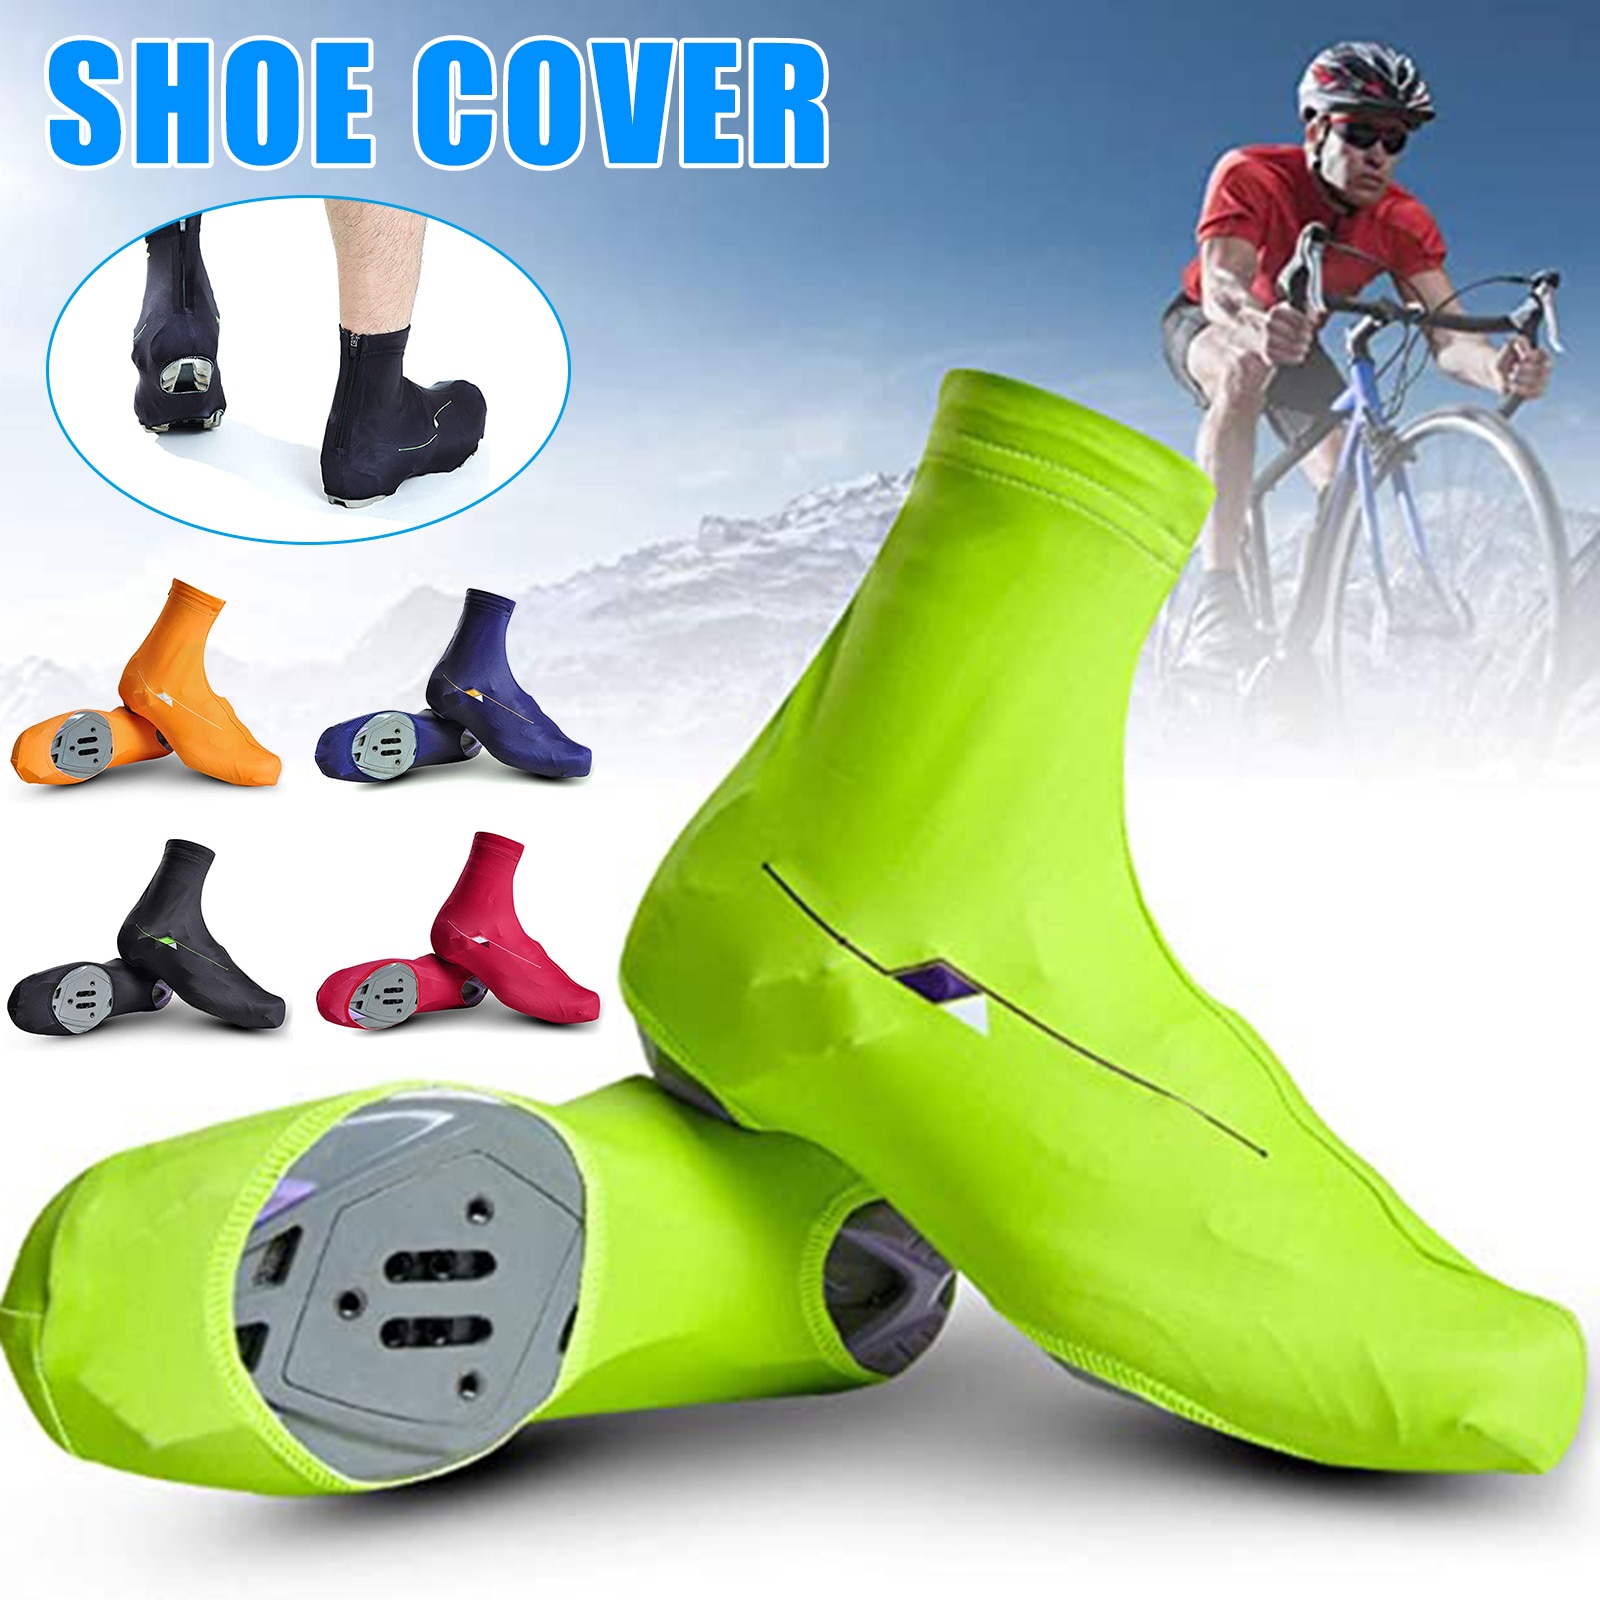 Bike Shoe Covers Cold-proof Waterproof MTB Mountain Road Cycling Shoe Covers Warmer Overshoes Booties Covers